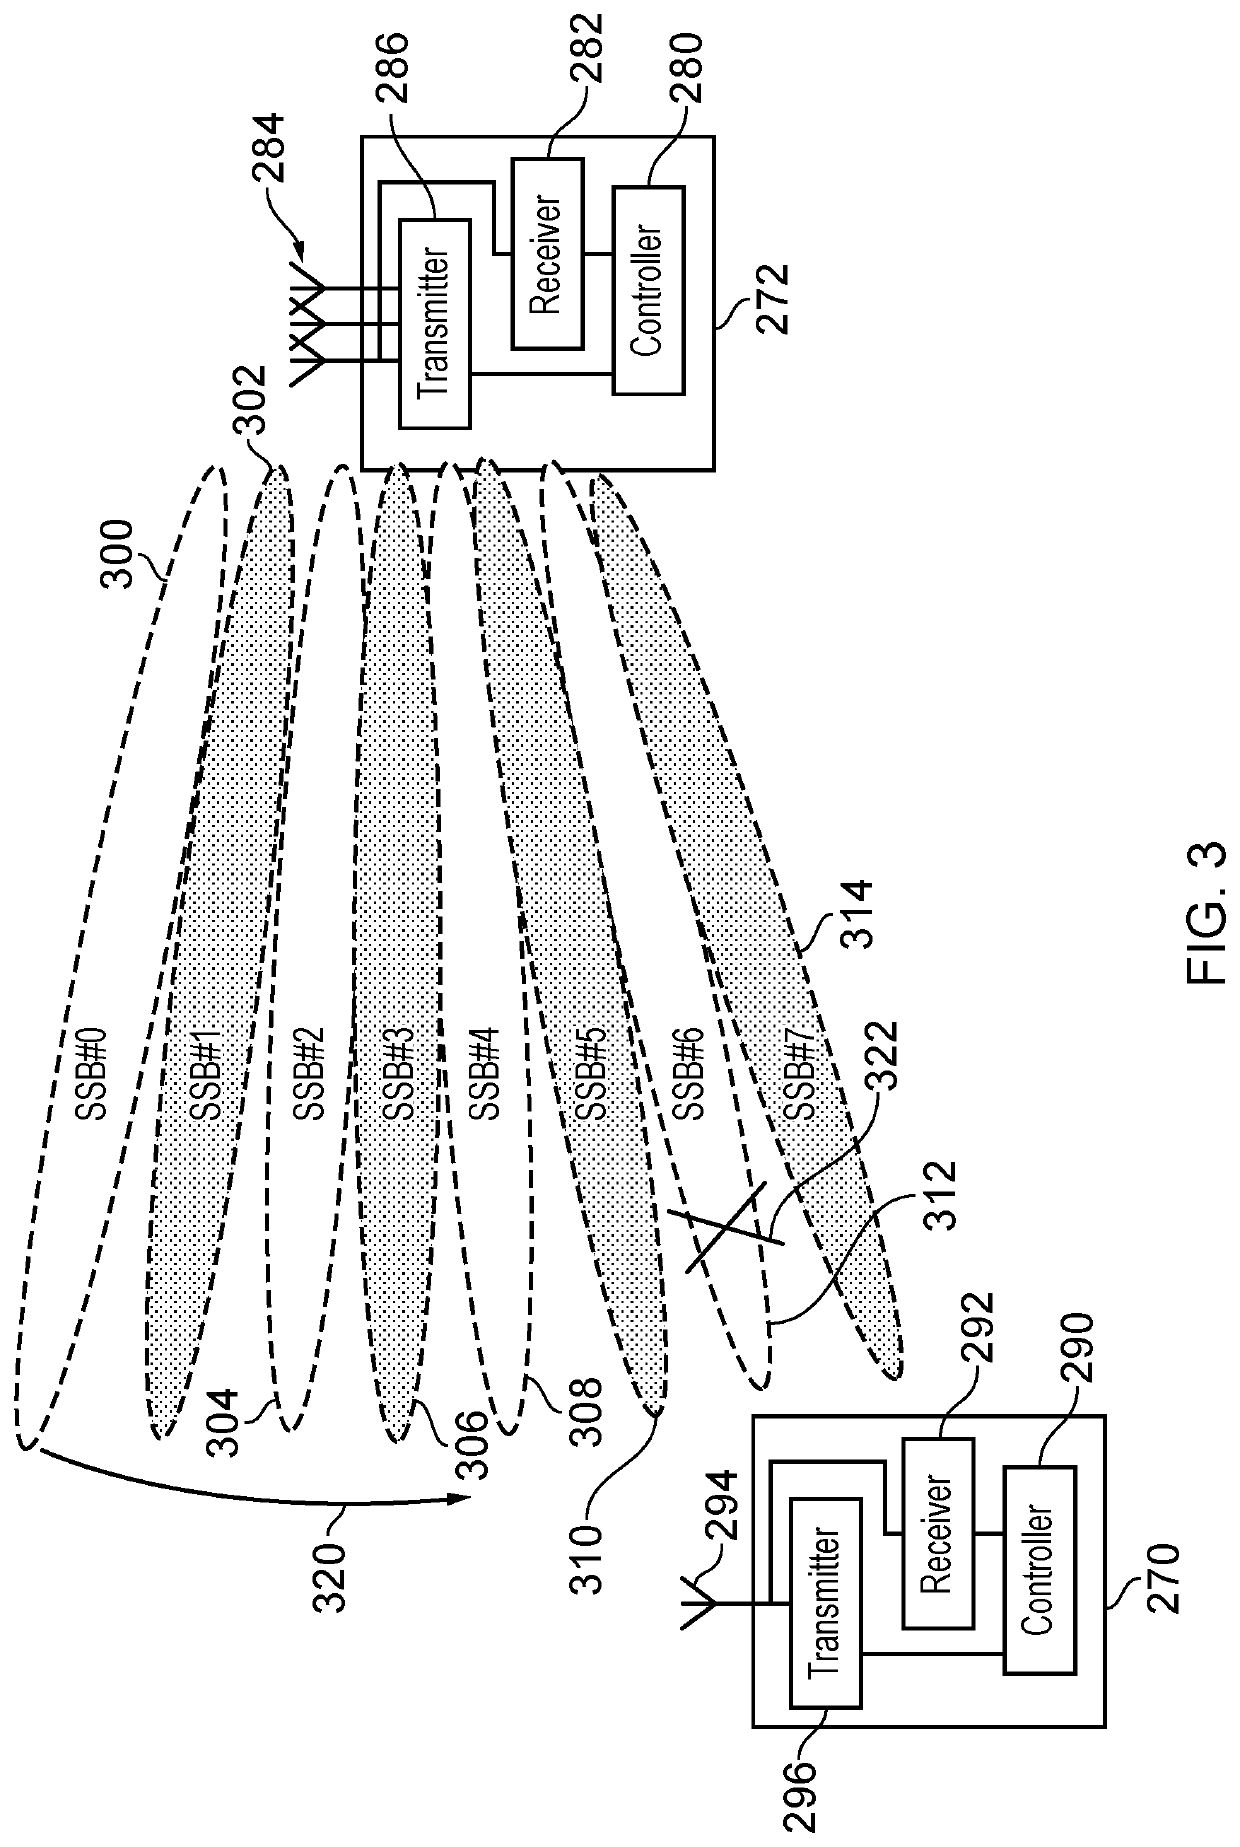 Communications device and method